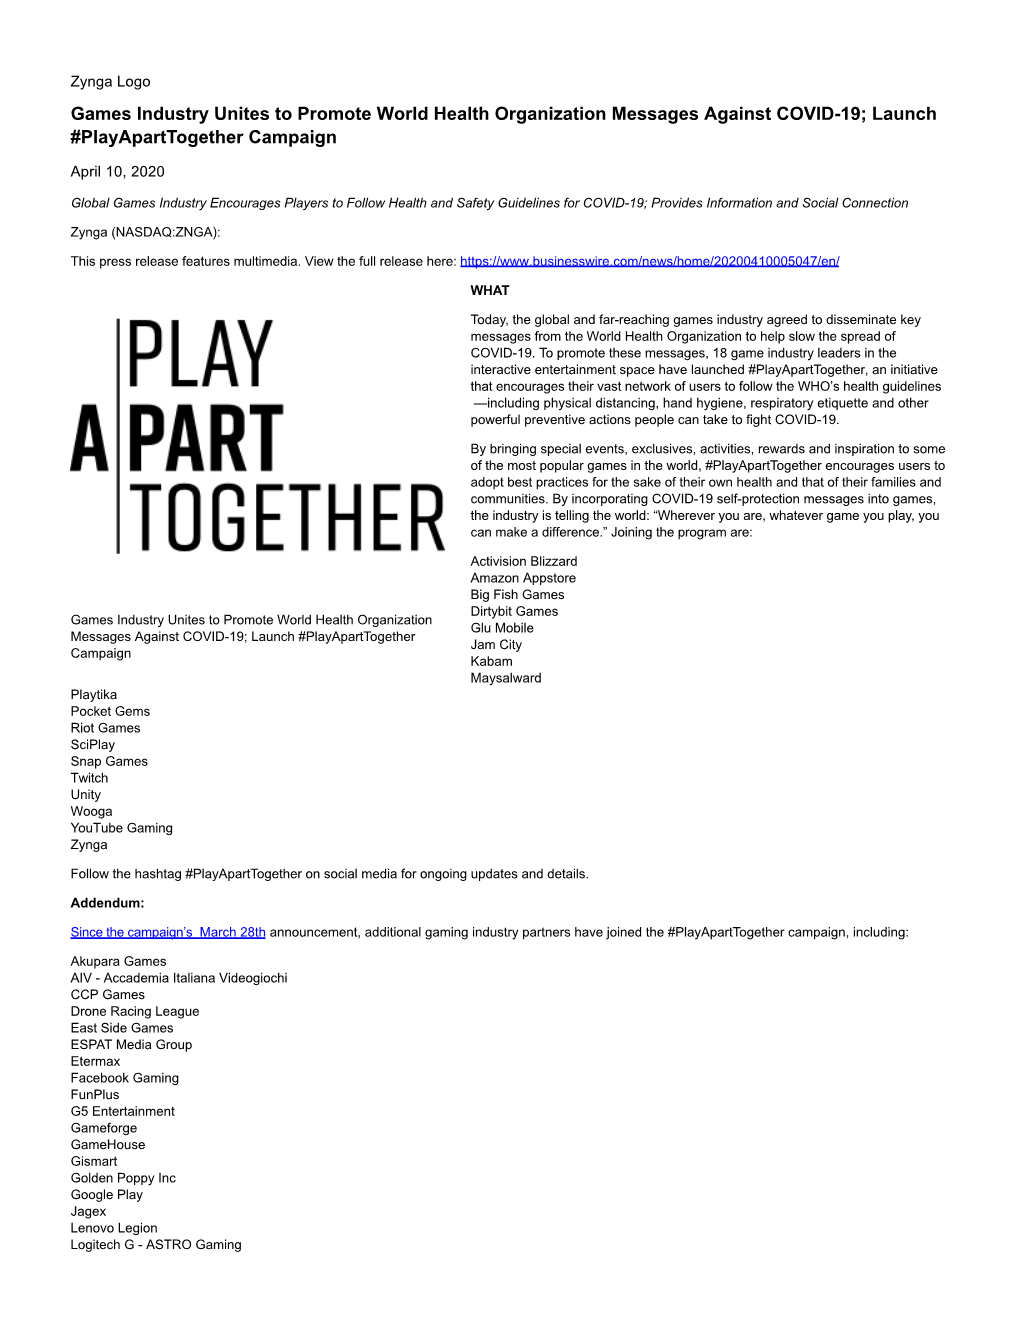 Games Industry Unites to Promote World Health Organization Messages Against COVID-19; Launch #Playaparttogether Campaign